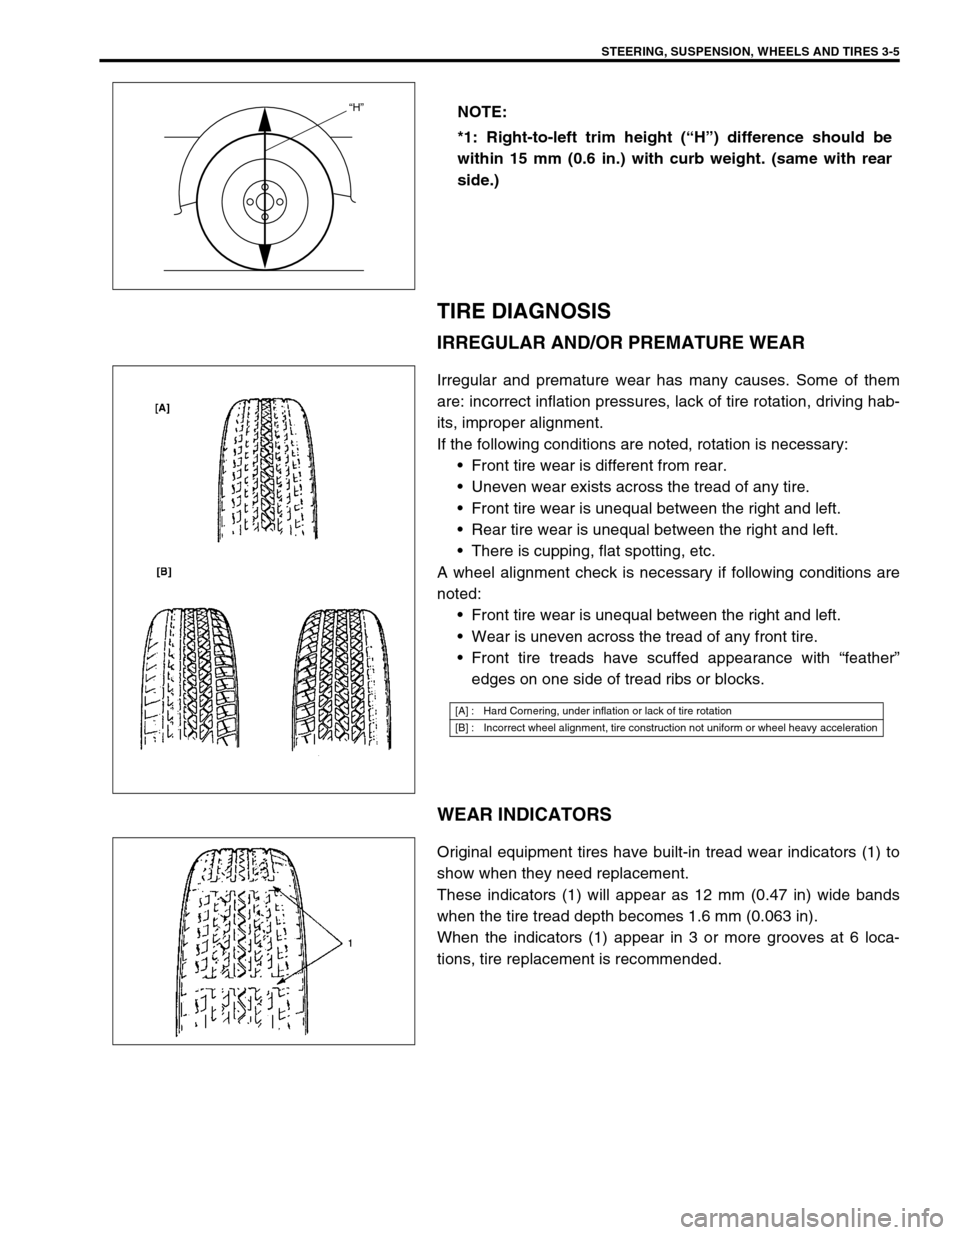 SUZUKI SWIFT 2000 1.G RG413 Service User Guide STEERING, SUSPENSION, WHEELS AND TIRES 3-5
TIRE DIAGNOSIS
IRREGULAR AND/OR PREMATURE WEAR
Irregular and premature wear has many causes. Some of them
are: incorrect inflation pressures, lack of tire ro